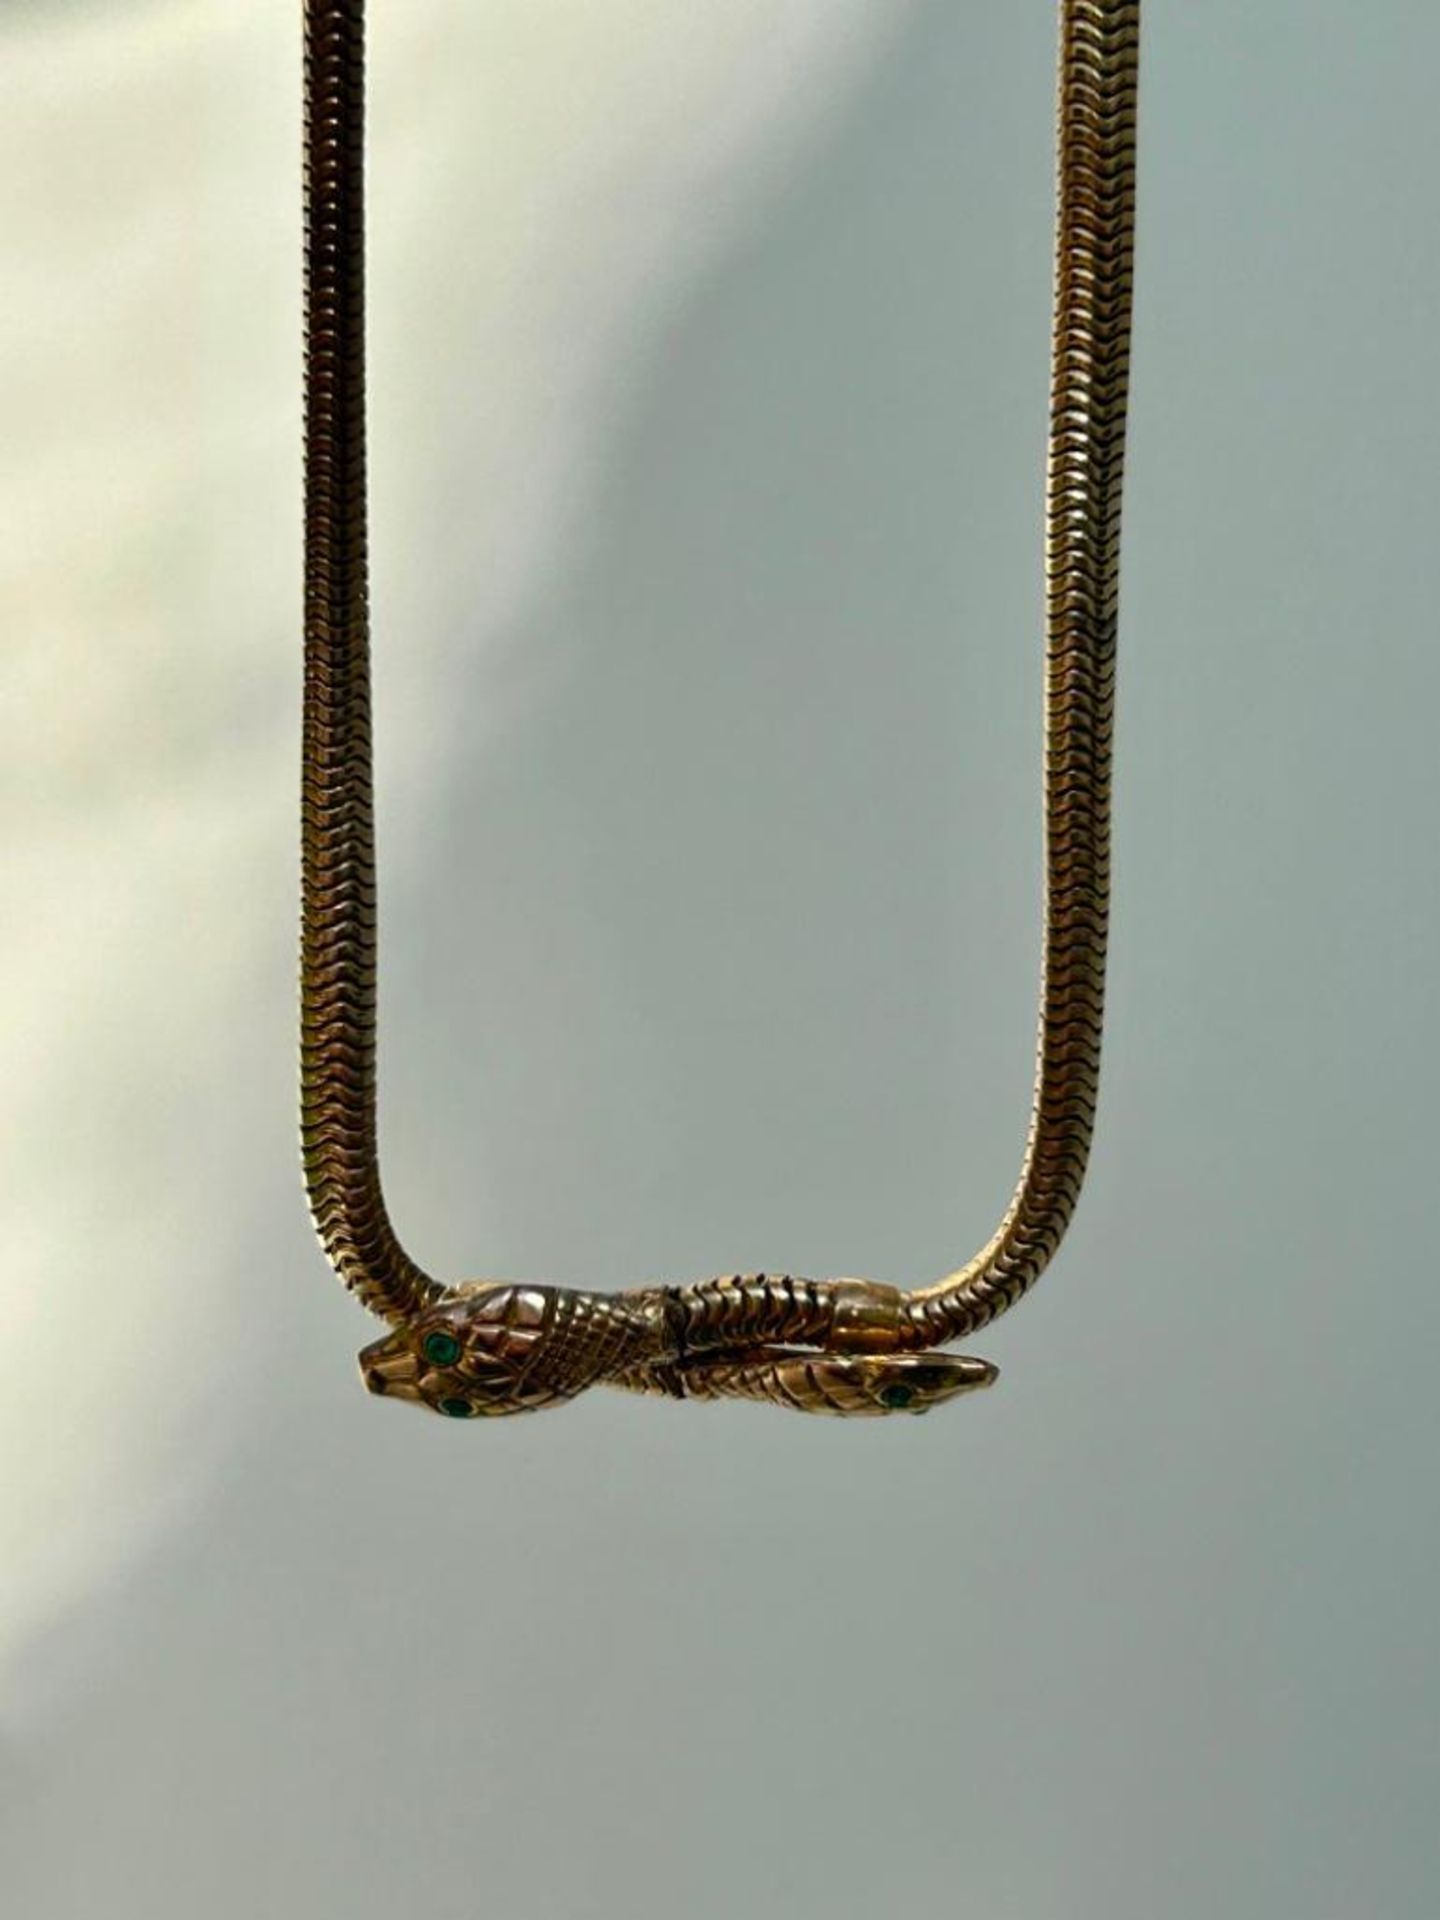 Double Headed Snake Necklace - Image 6 of 7